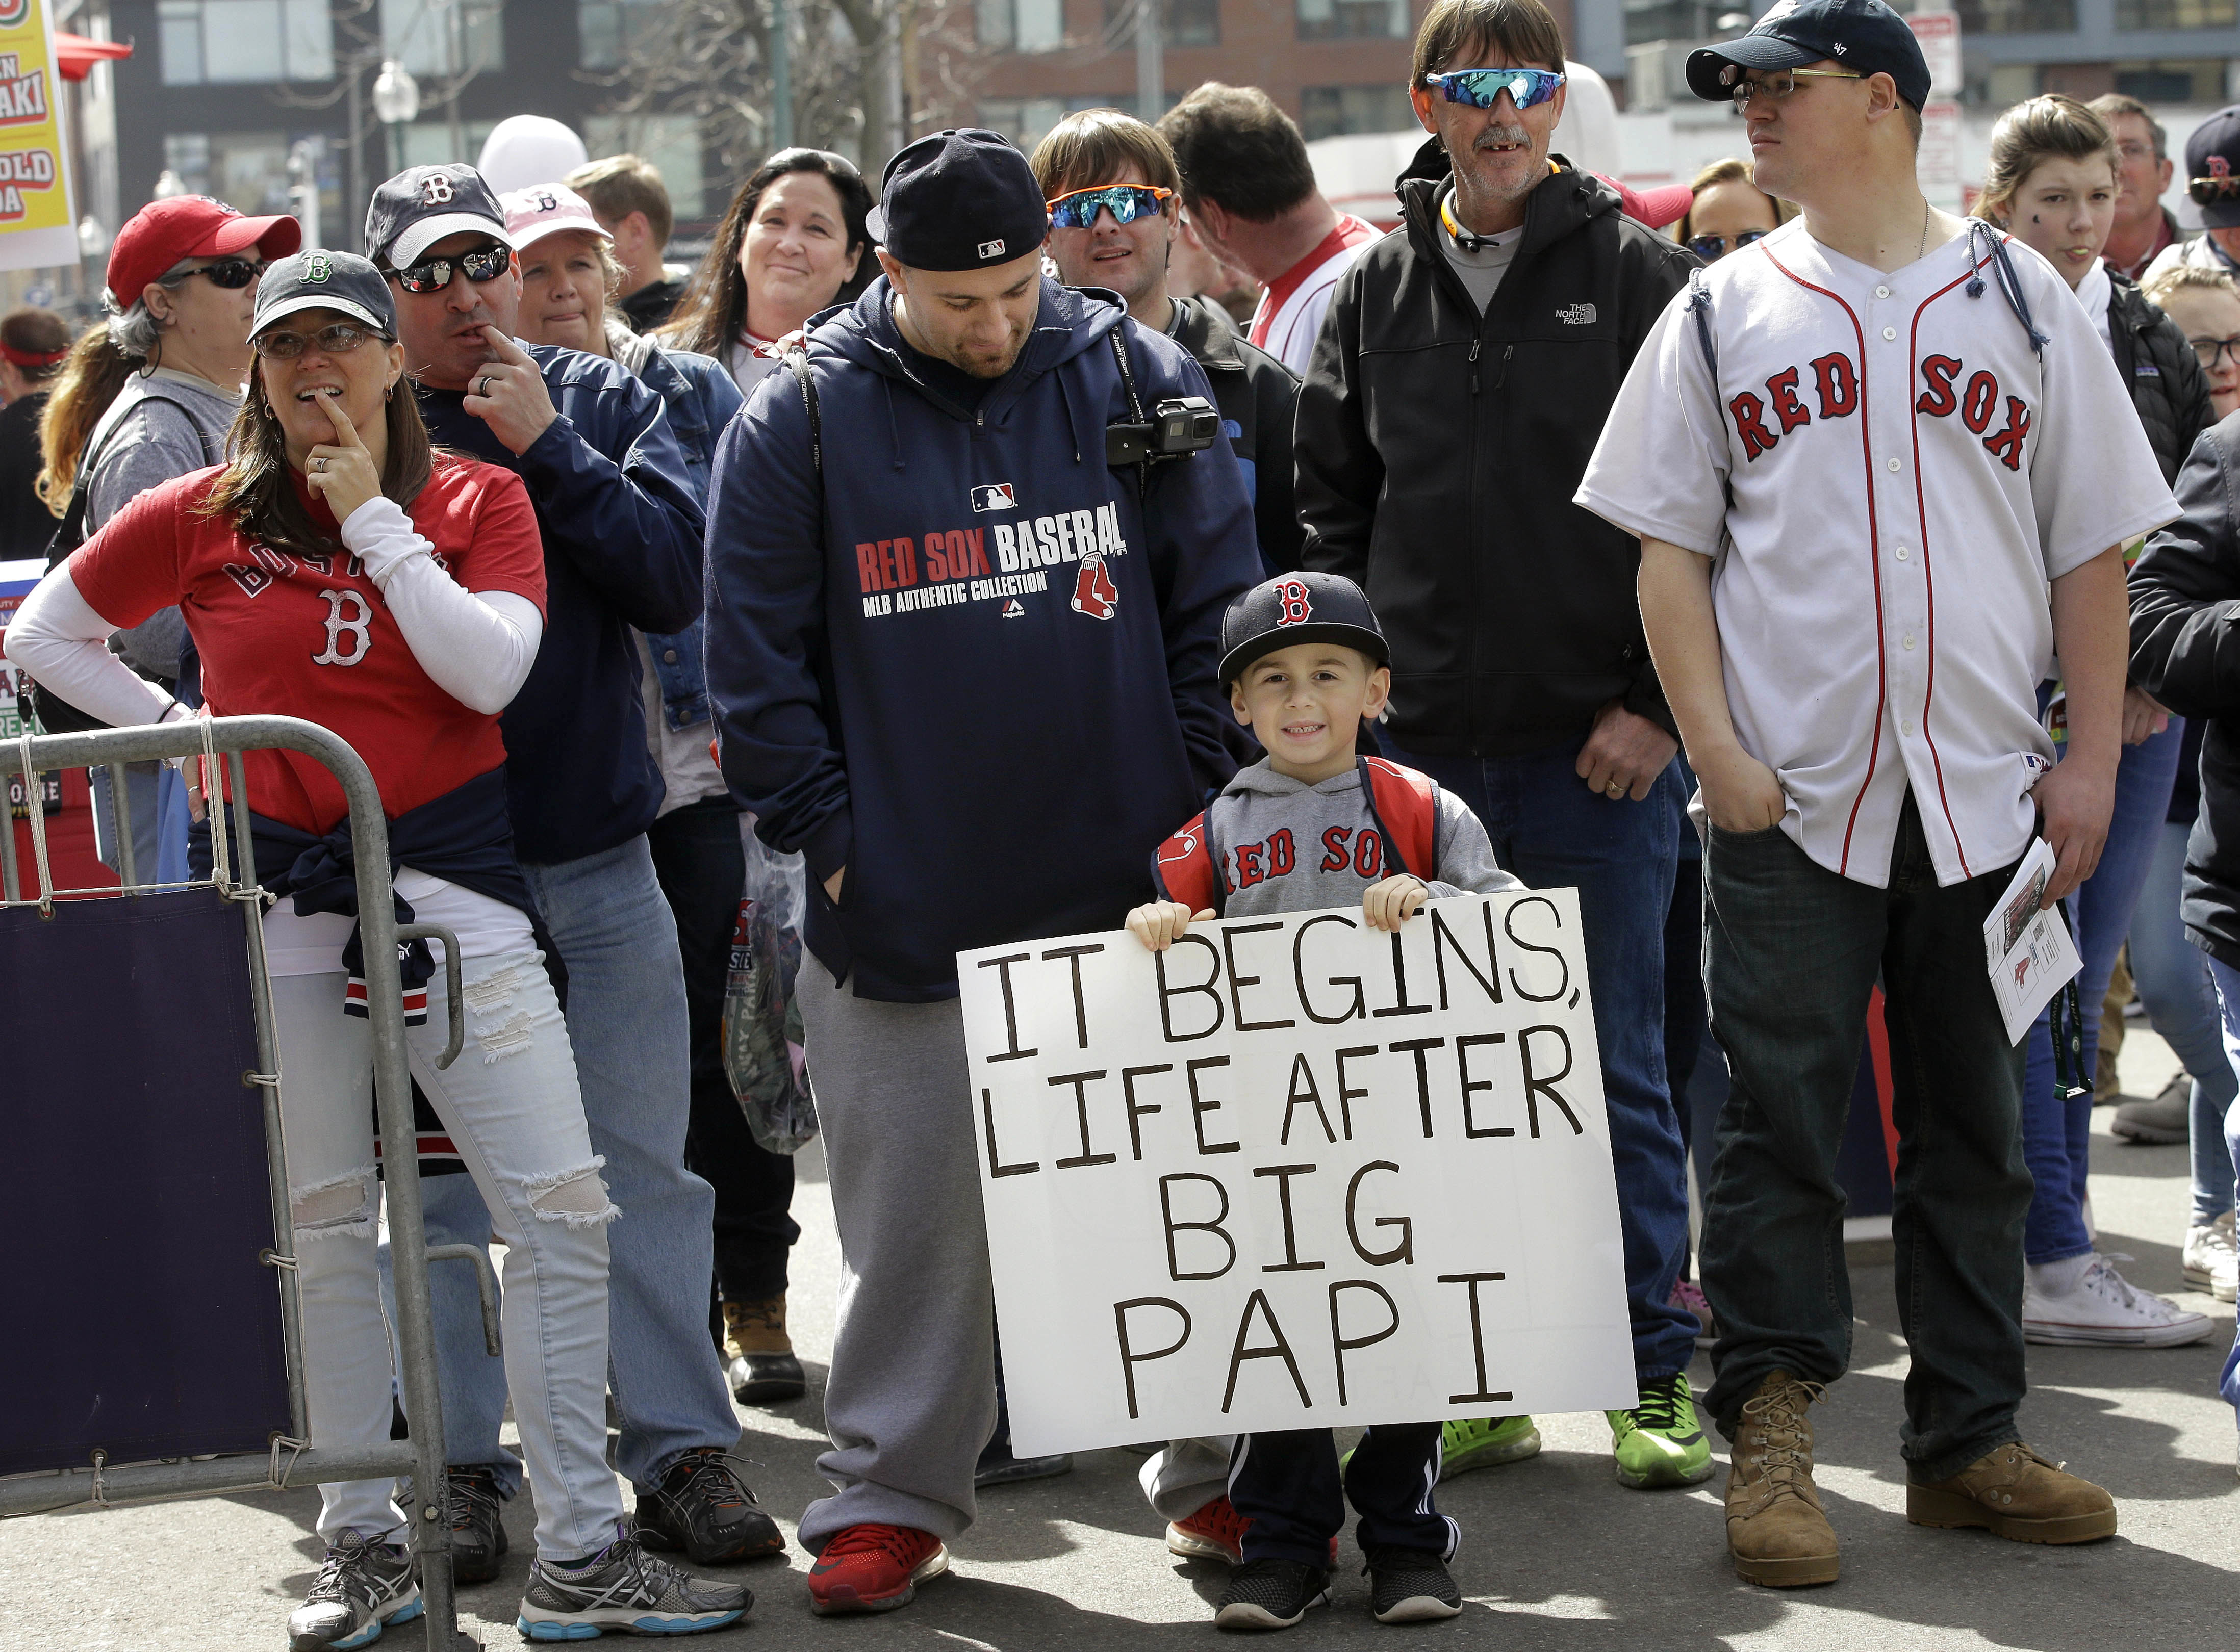 Travis Gonick, center, and his son T.J., both of Nutley N.J., wait with other fans to enter Fenway Park for a baseball game between the Boston Red Sox and the Pittsburgh Pirates on opening day, Monday, April 3, 2017, in Boston.  Steven Senne | Associated Press.